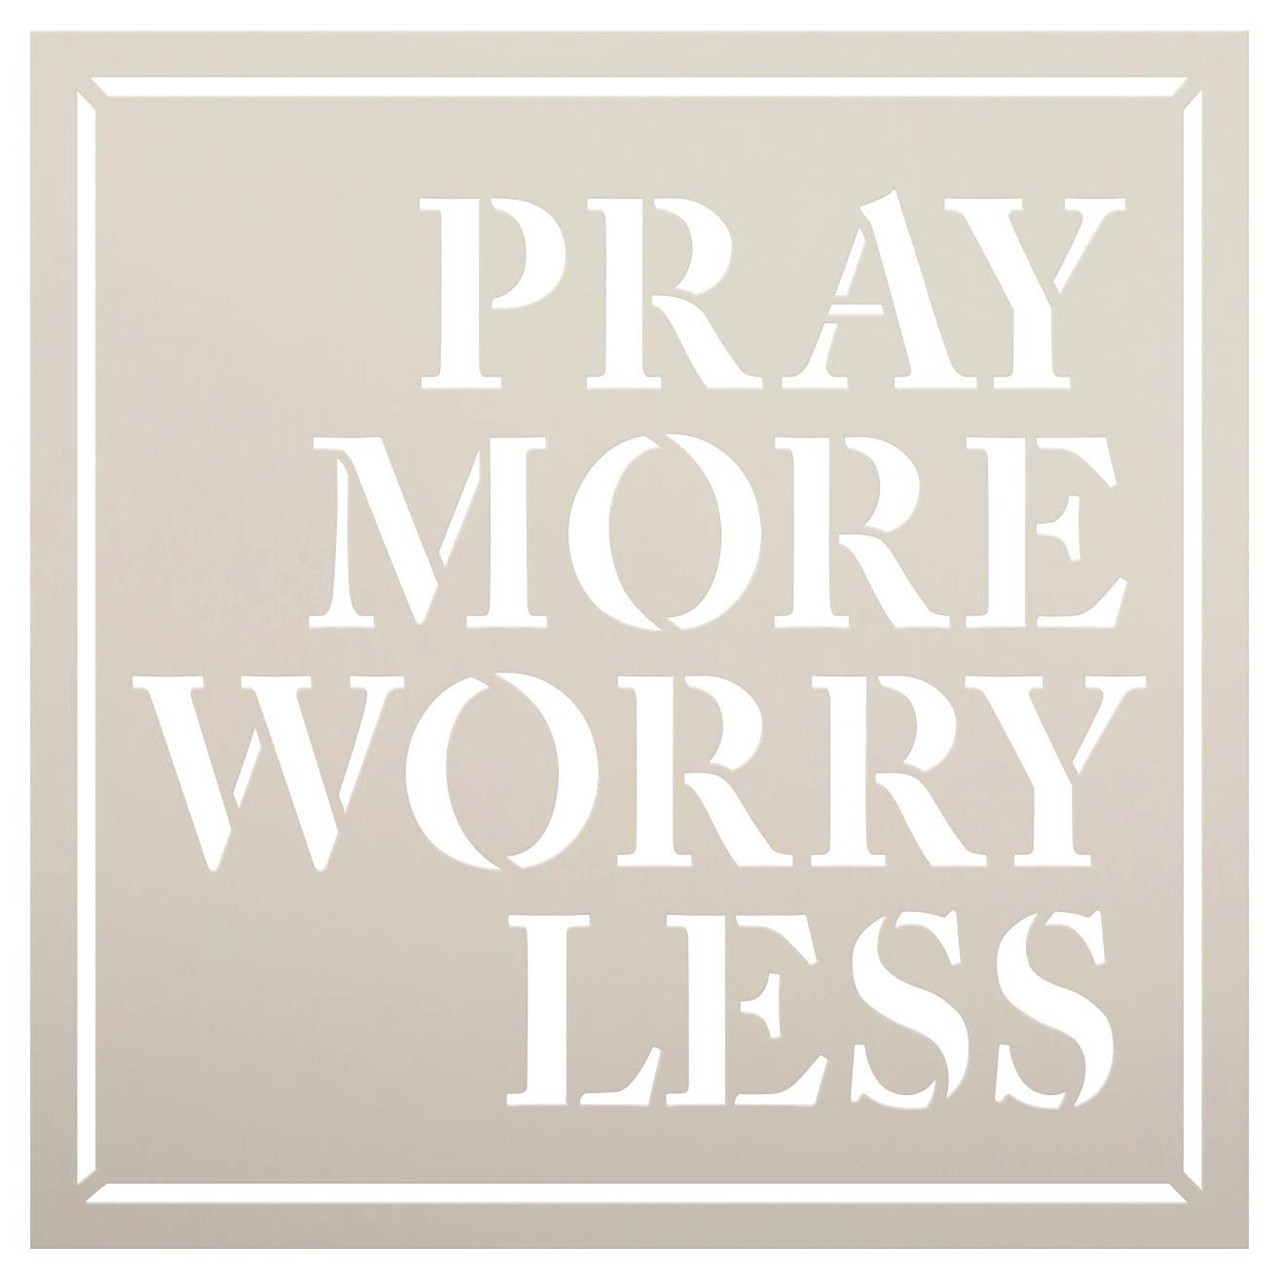 Pray More Worry Less Stencil by StudioR12 | Christian Faith & Inspirational | Simple Farmhouse Decor | Reusable Mylar Template | DIY Home Crafting Gift | Paint Wood Signs | Select Size